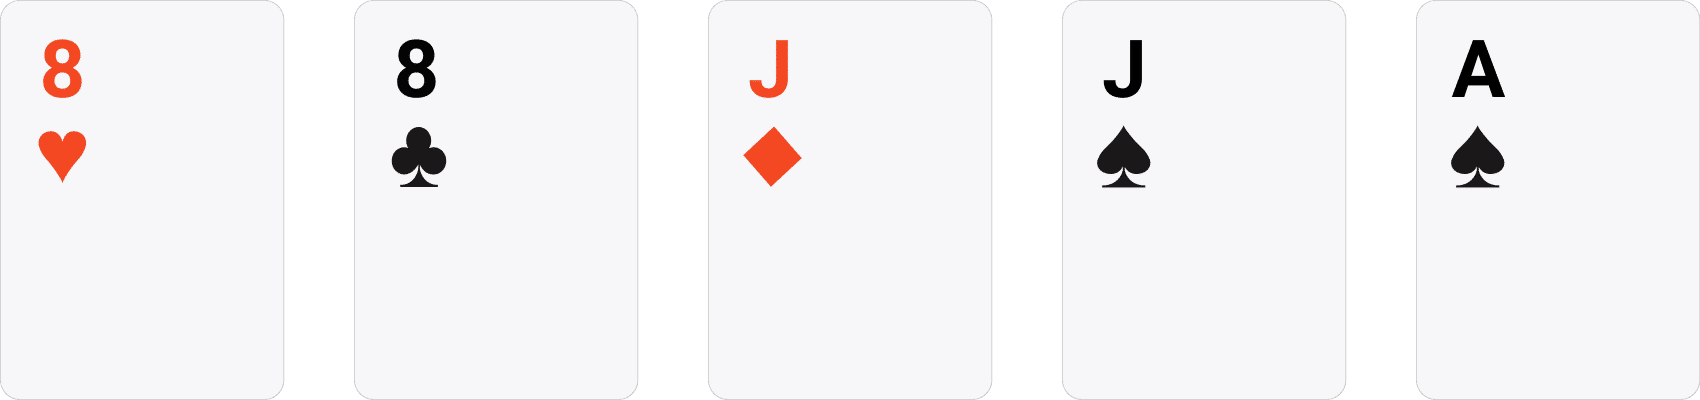 Two Pair Poker example